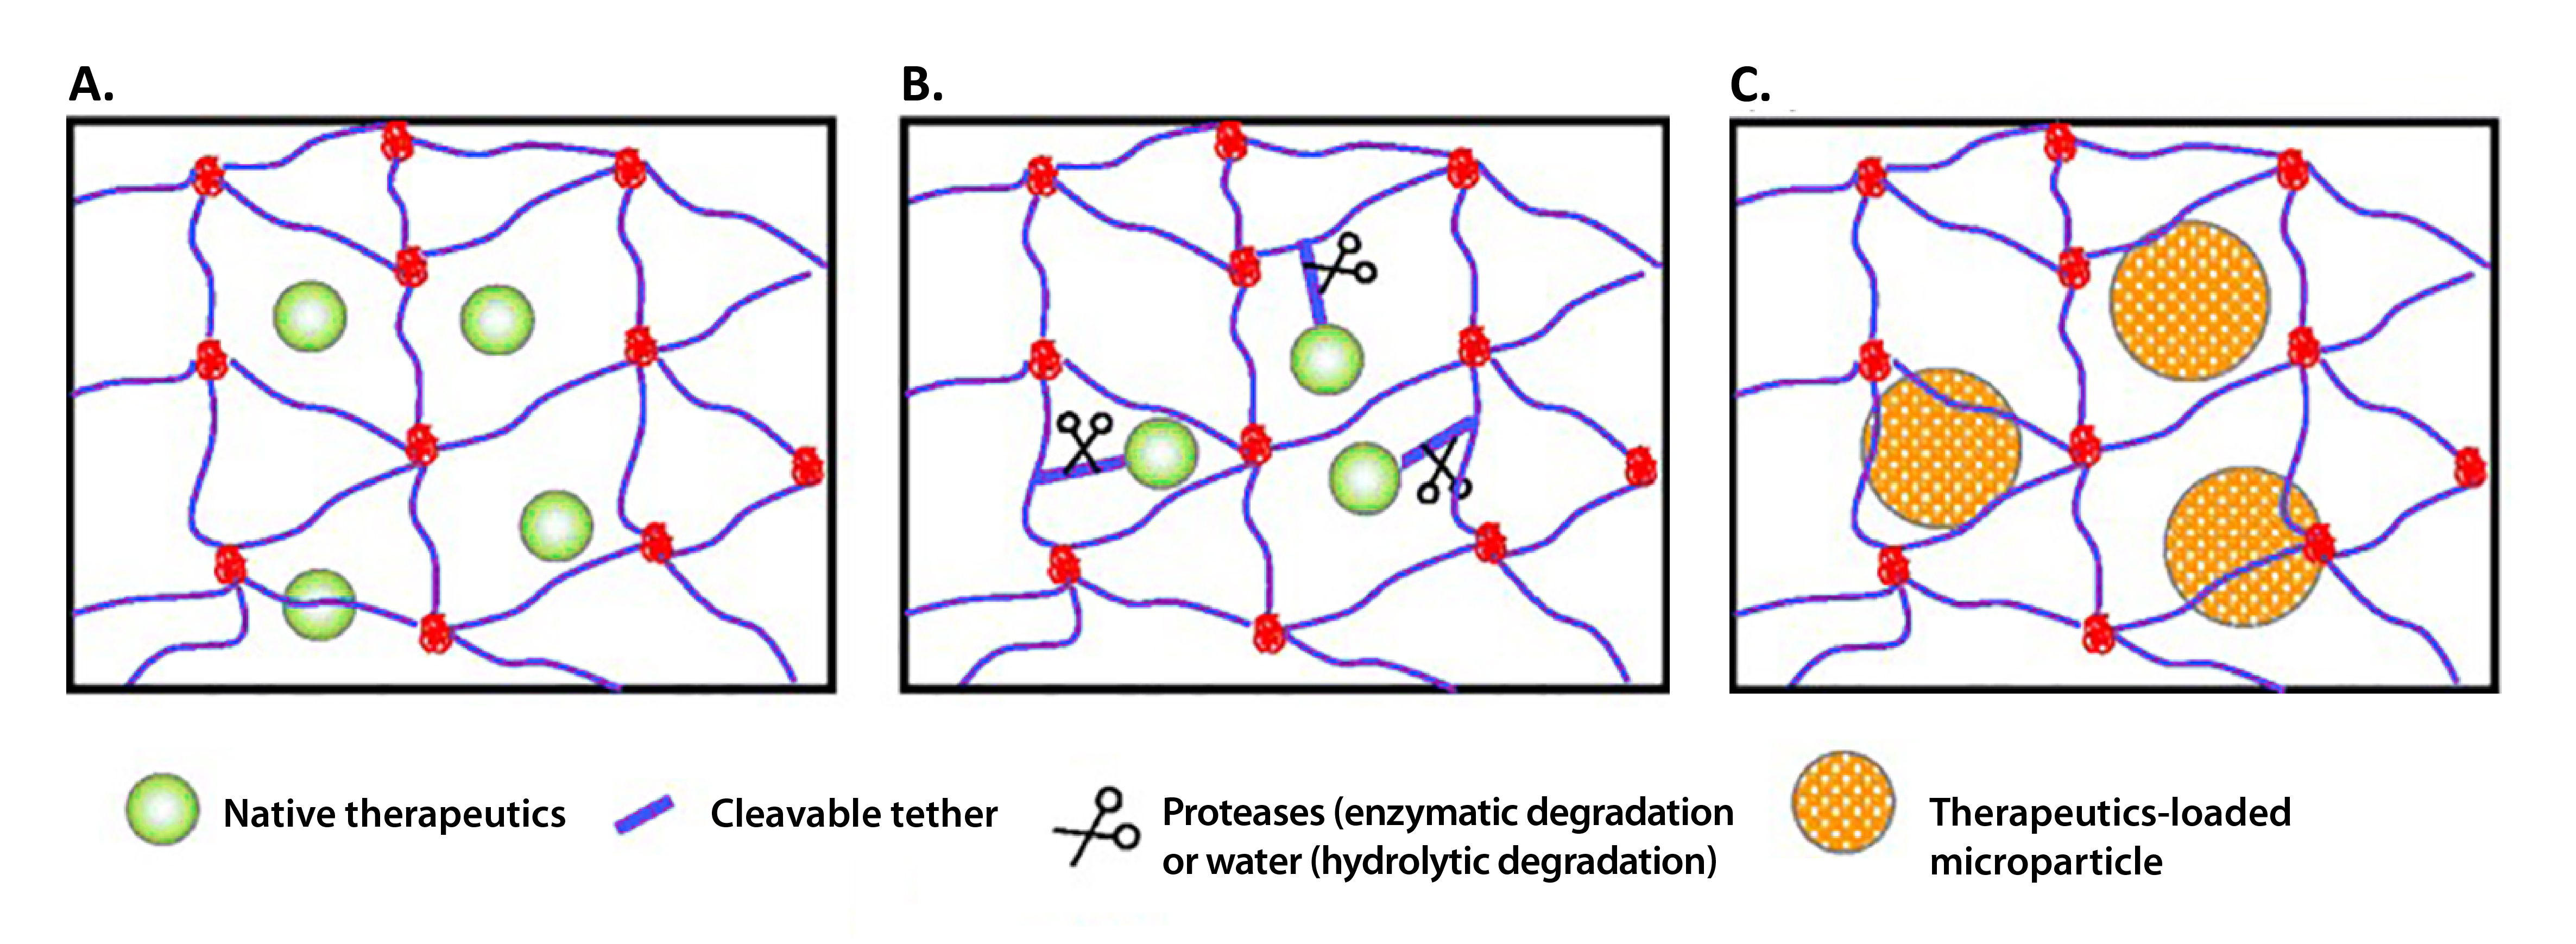 chematic structures of PEG hydrogels formed via: A chain-growth, B step-growth, and C mixed-mode step and chain growth polymerization.